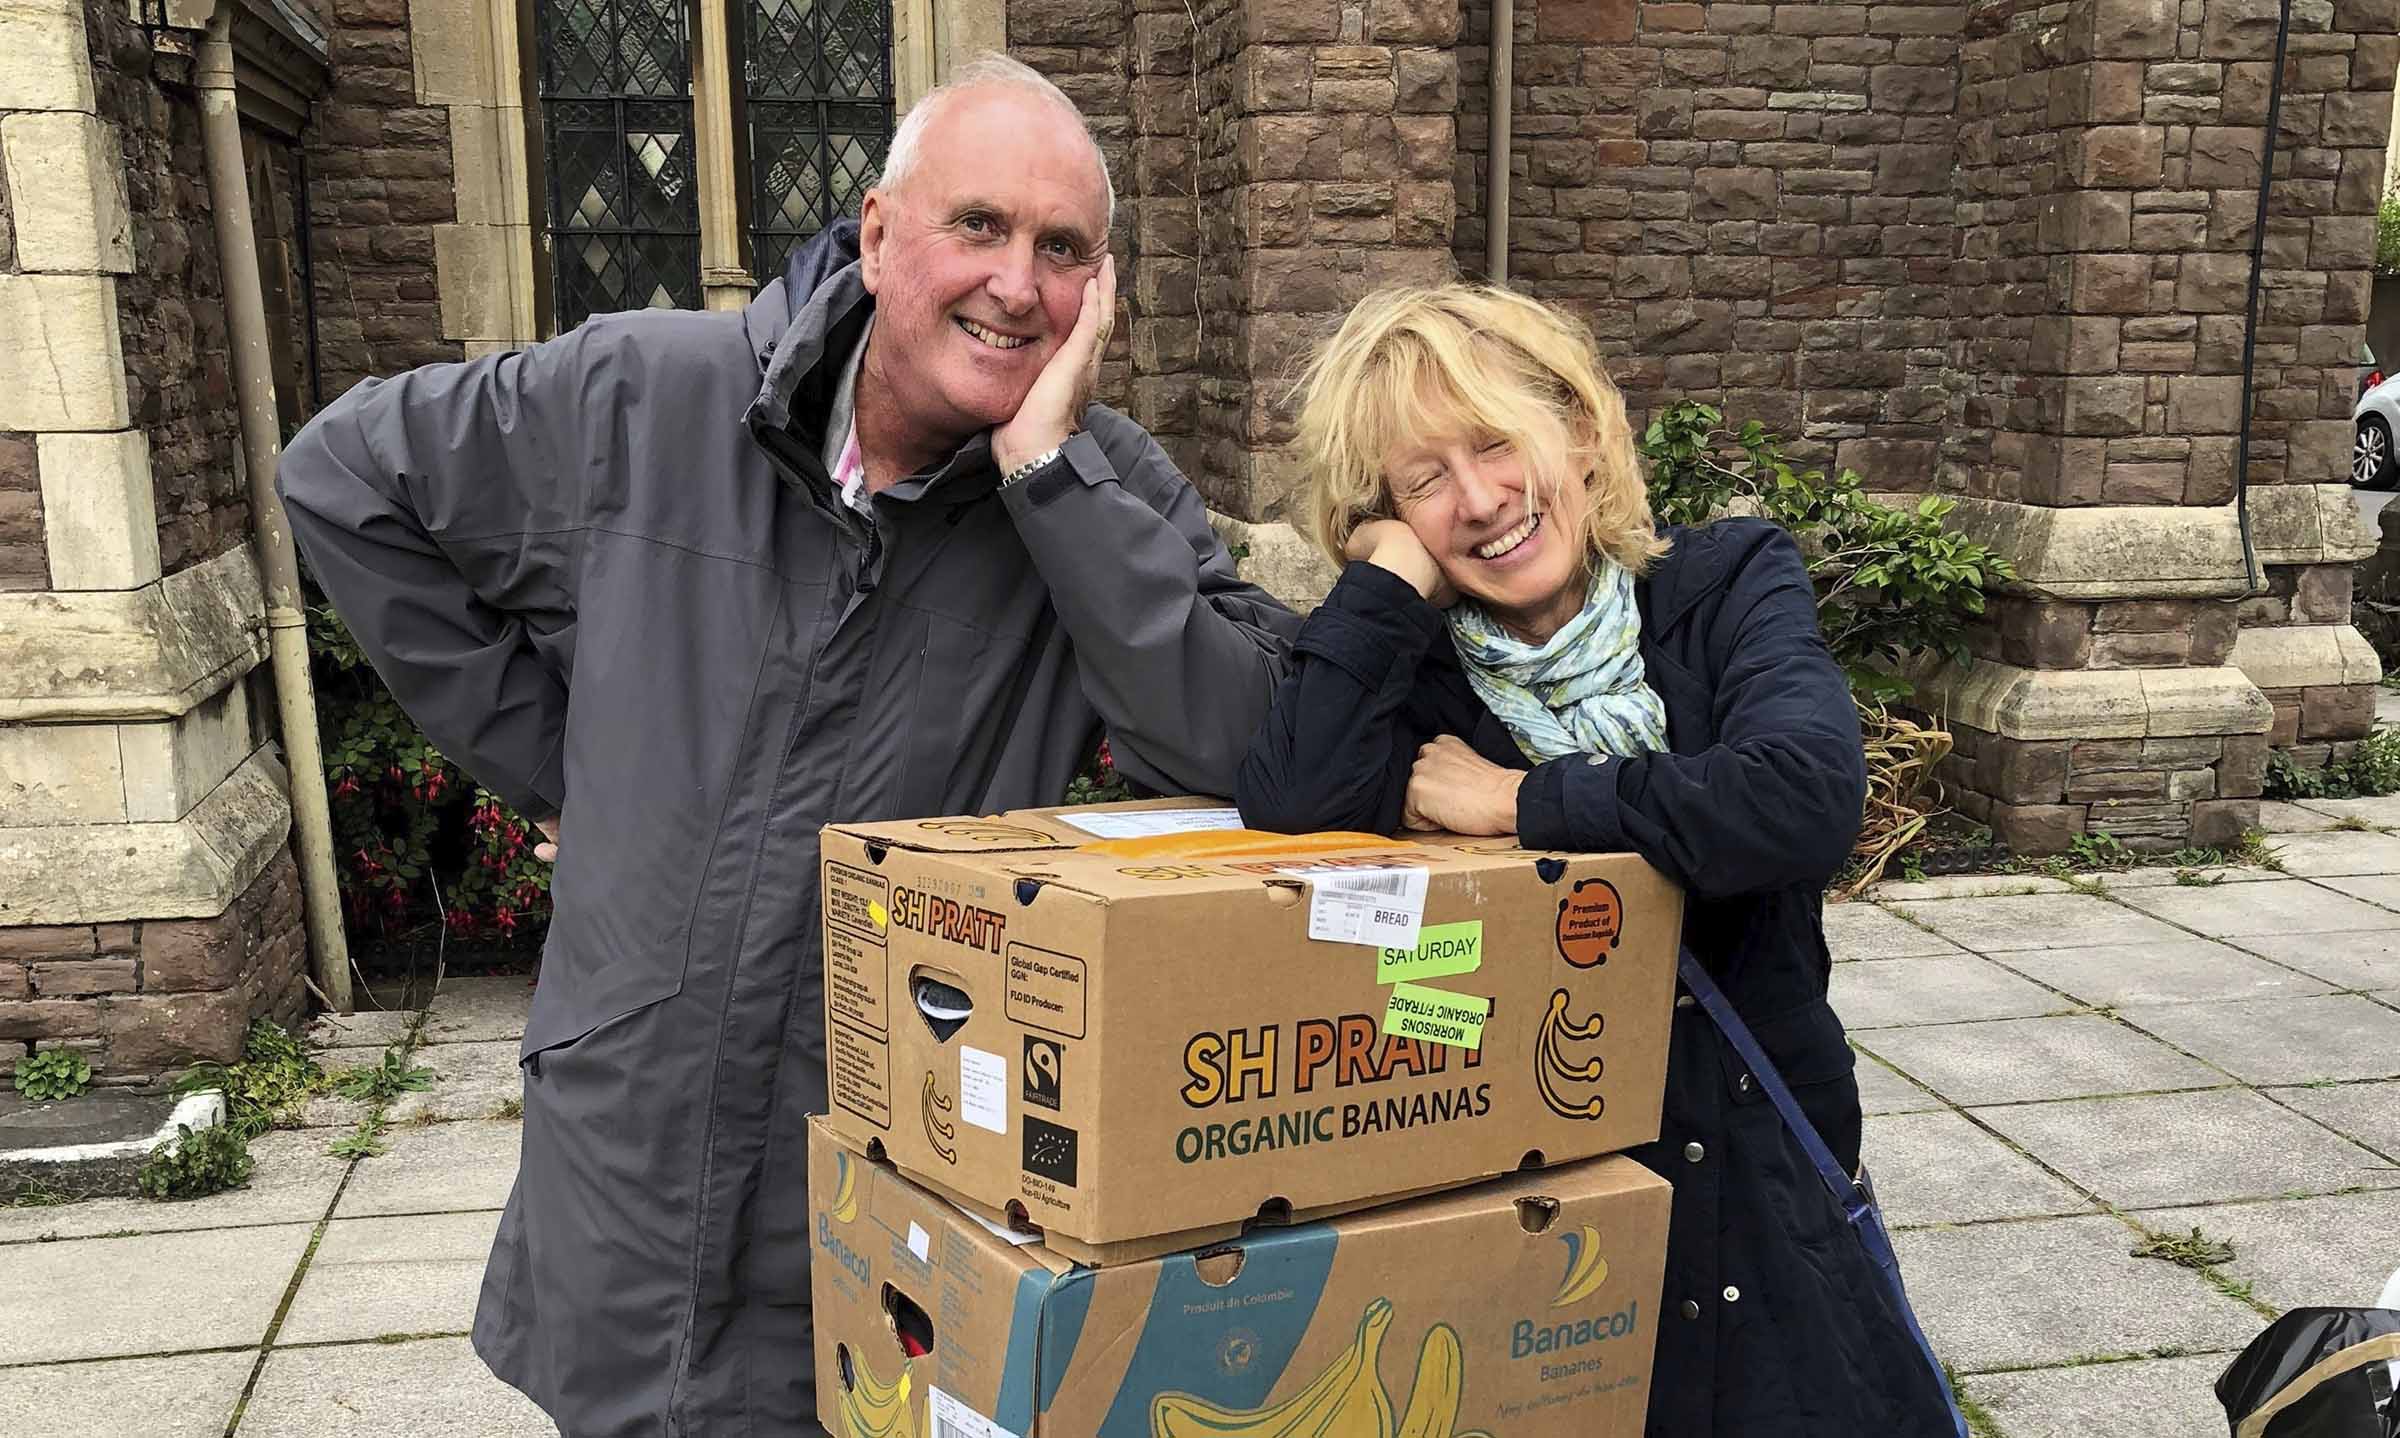 Man and woman outside church with boxes of bananas